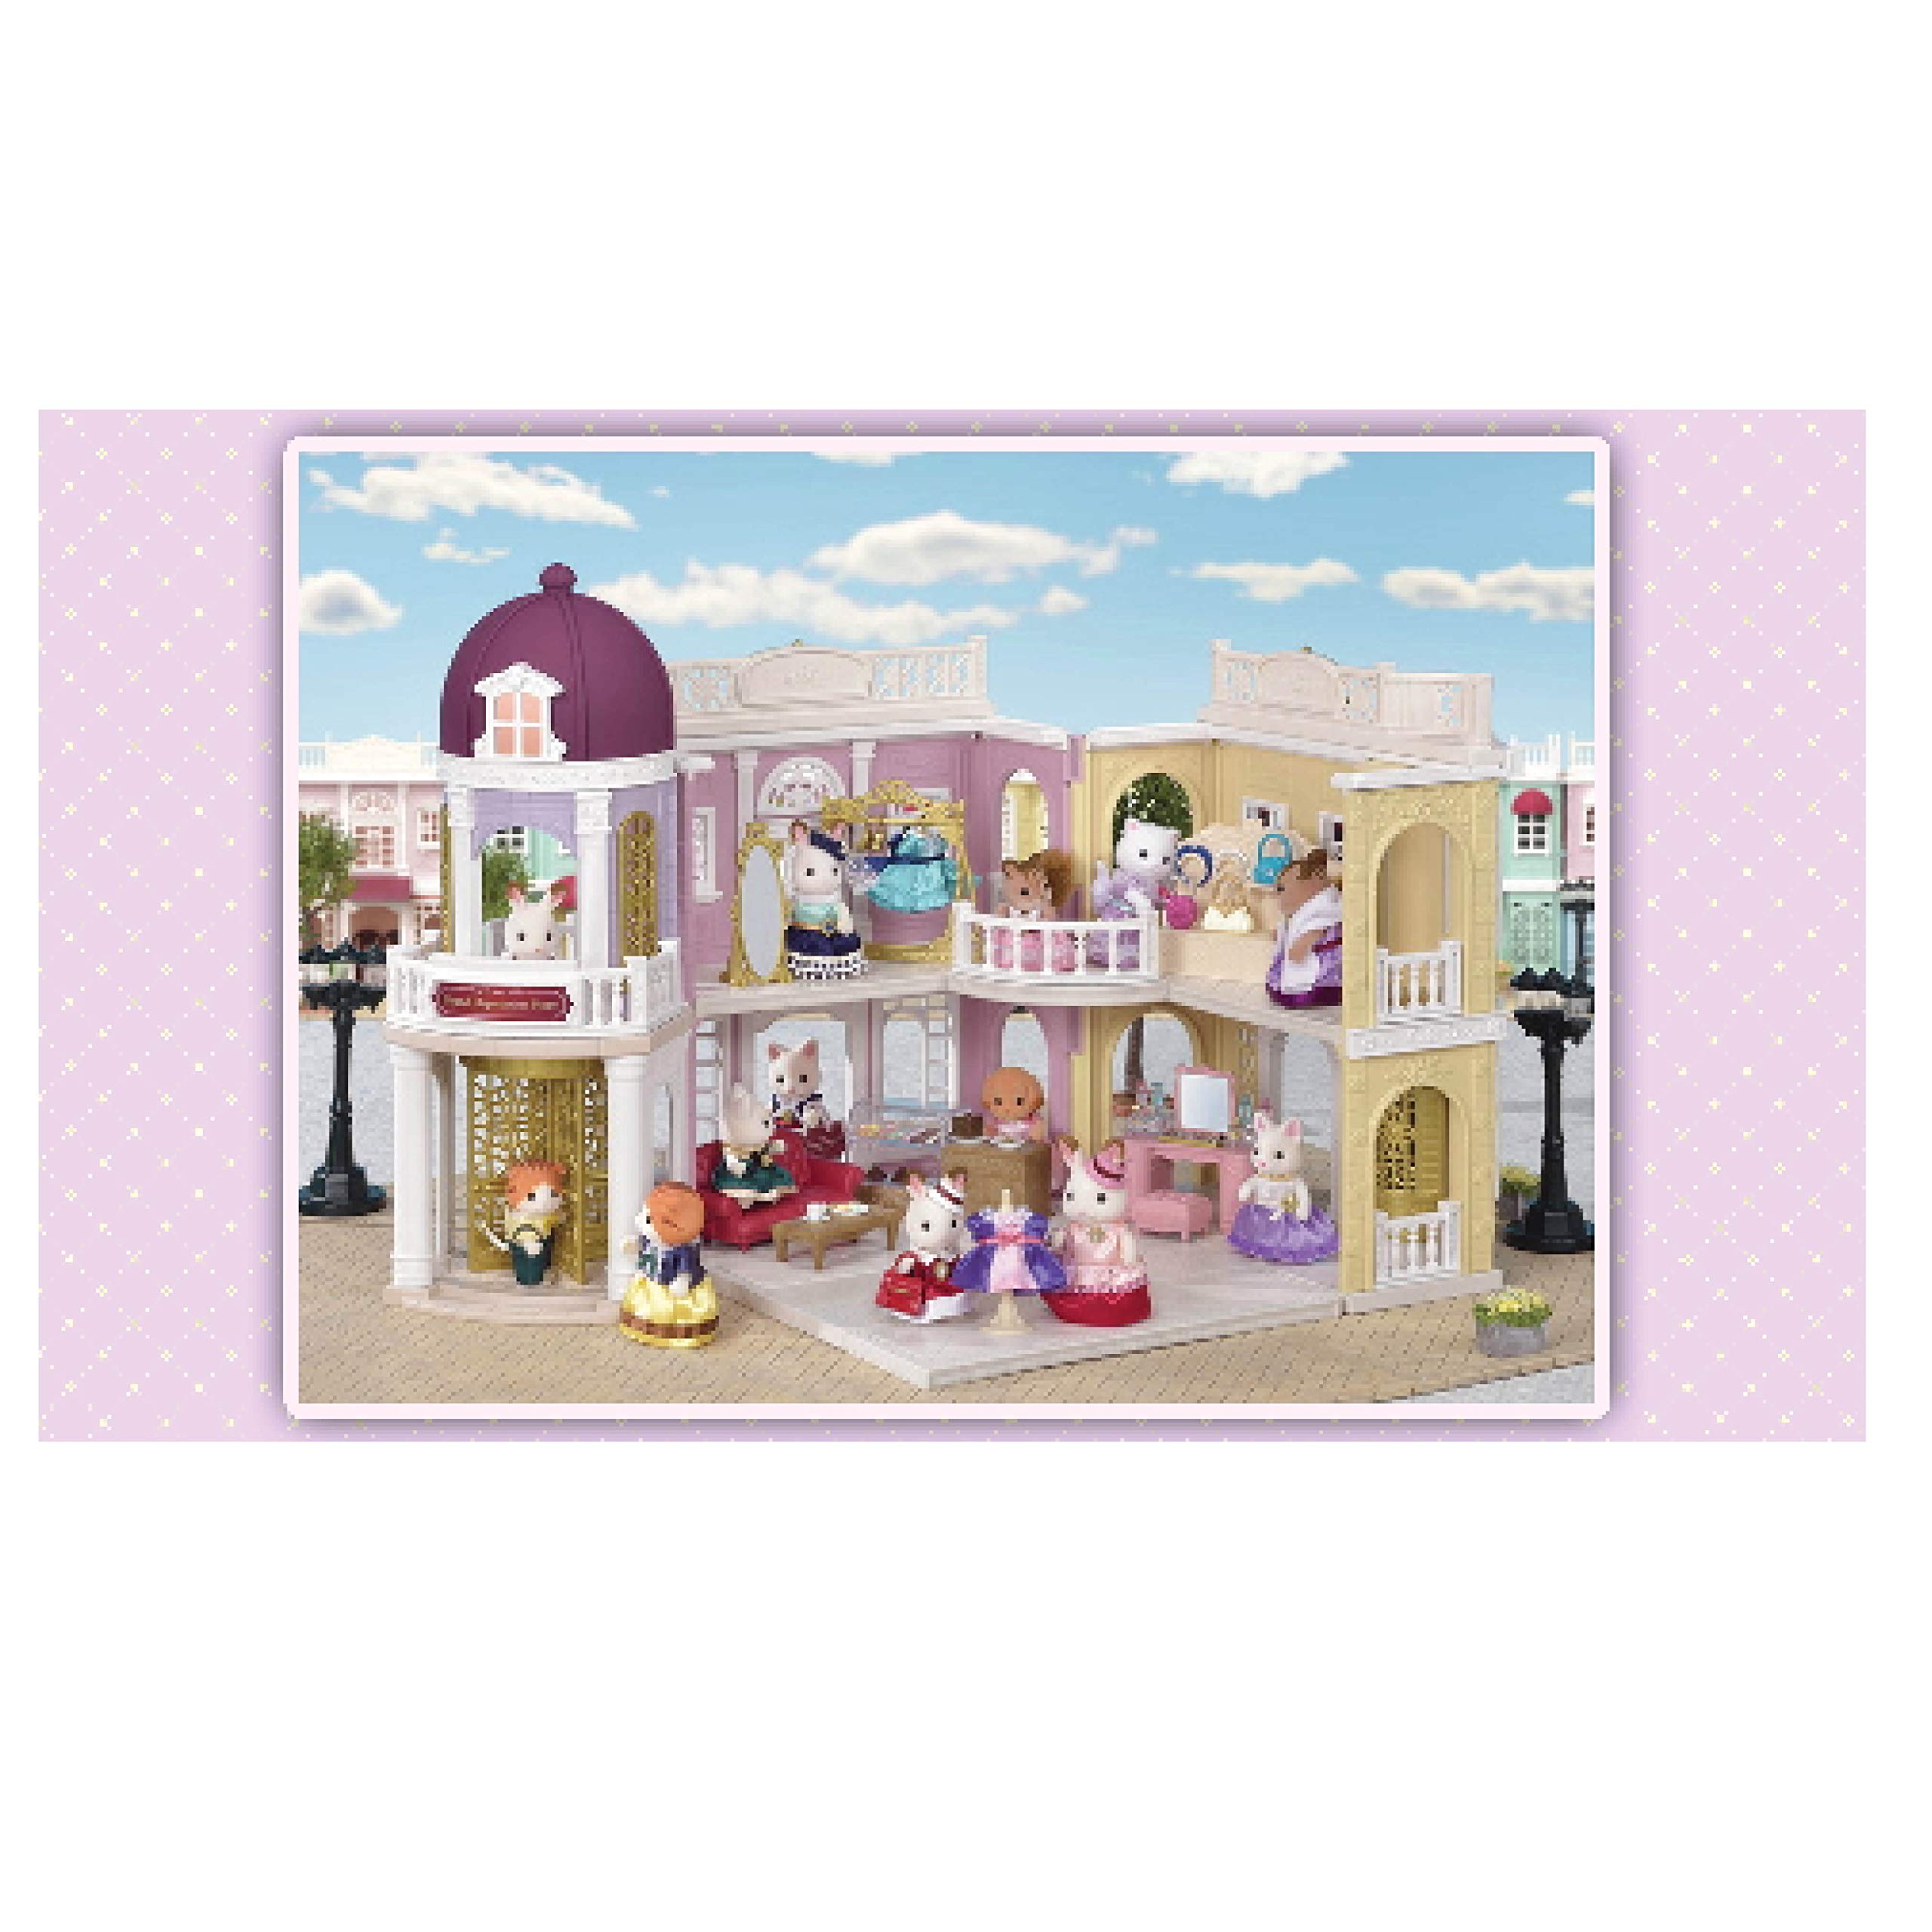 Calico Critters Town Series Grand Department Store Gift Set, 3 - 8 years, Fashion Dollhouse Playset, Figure, Furniture and Accessories Included